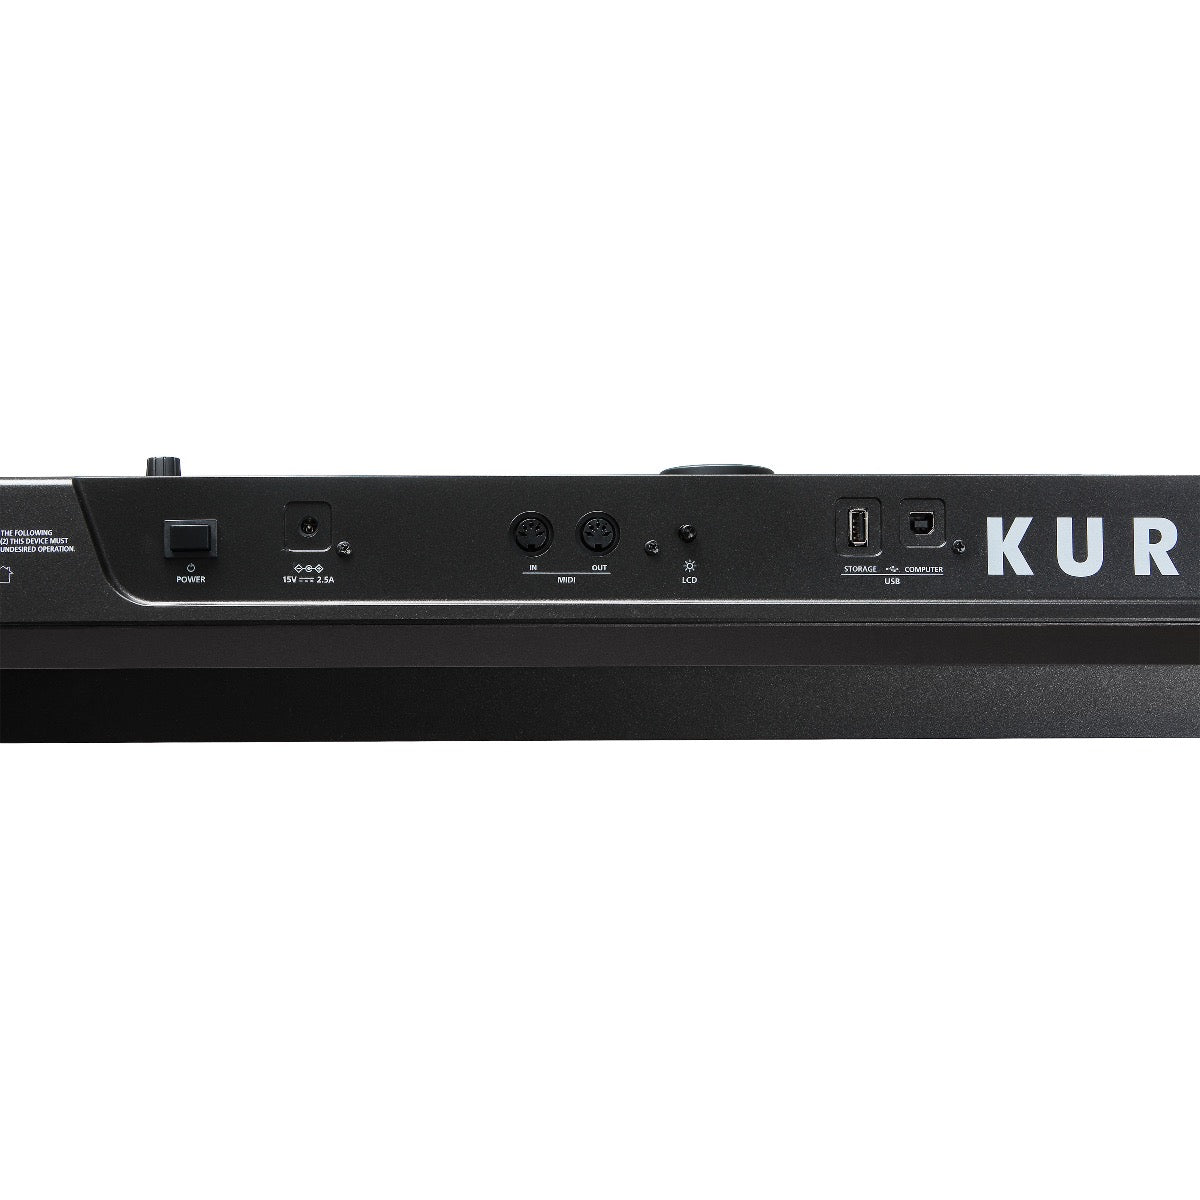 Detail rear view of Kurzweil PC4-7 76-Key Workstation Keyboard showing MIDI and USB connections